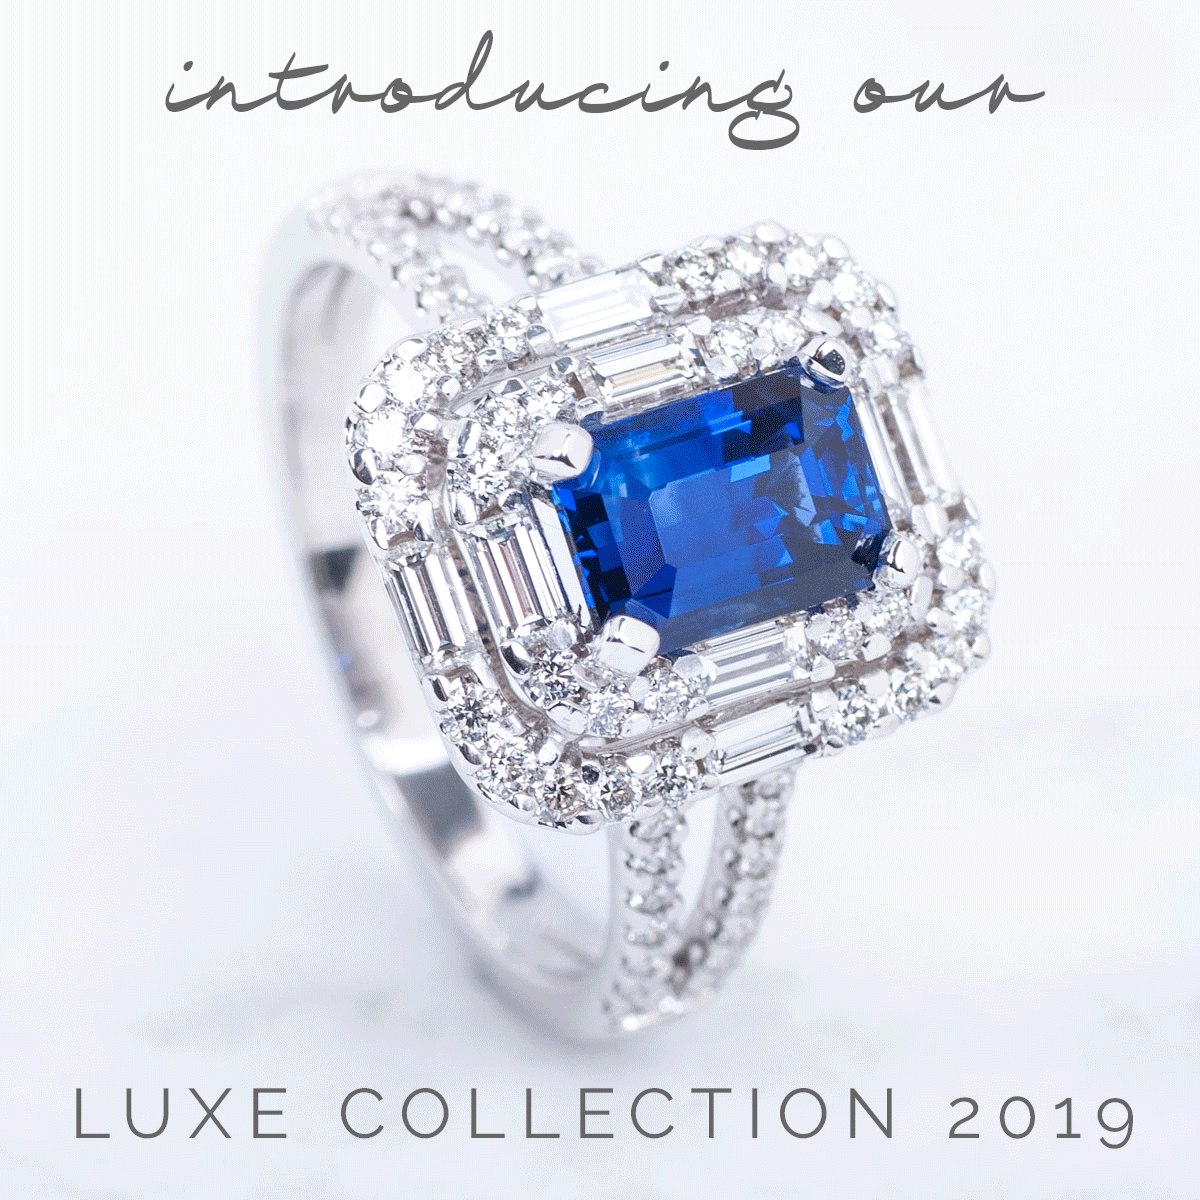 luxe-collection-banner.gif